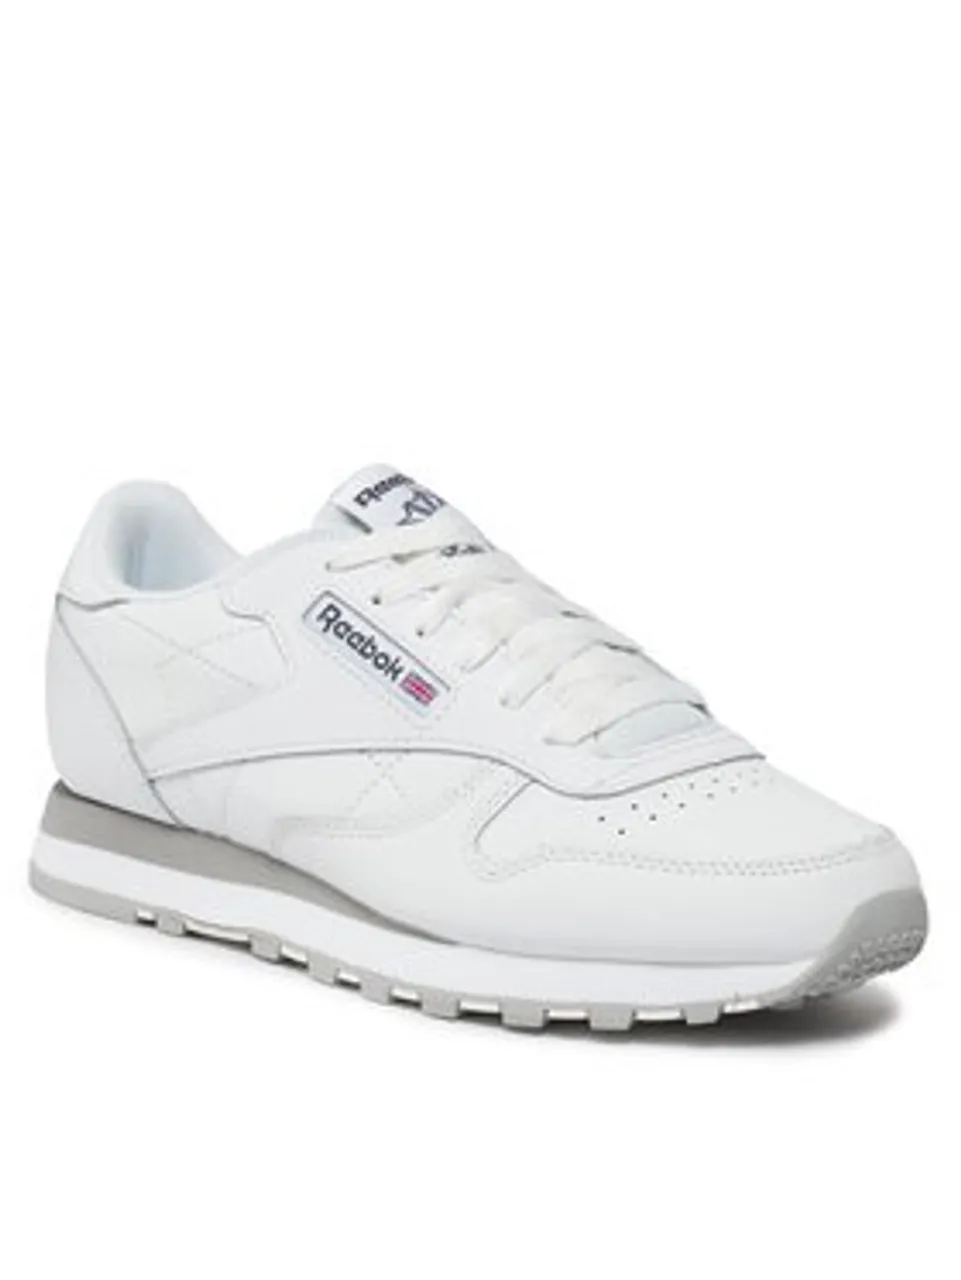 Reebok Sneakers Classic Leather Shoes GX6589 Weiß